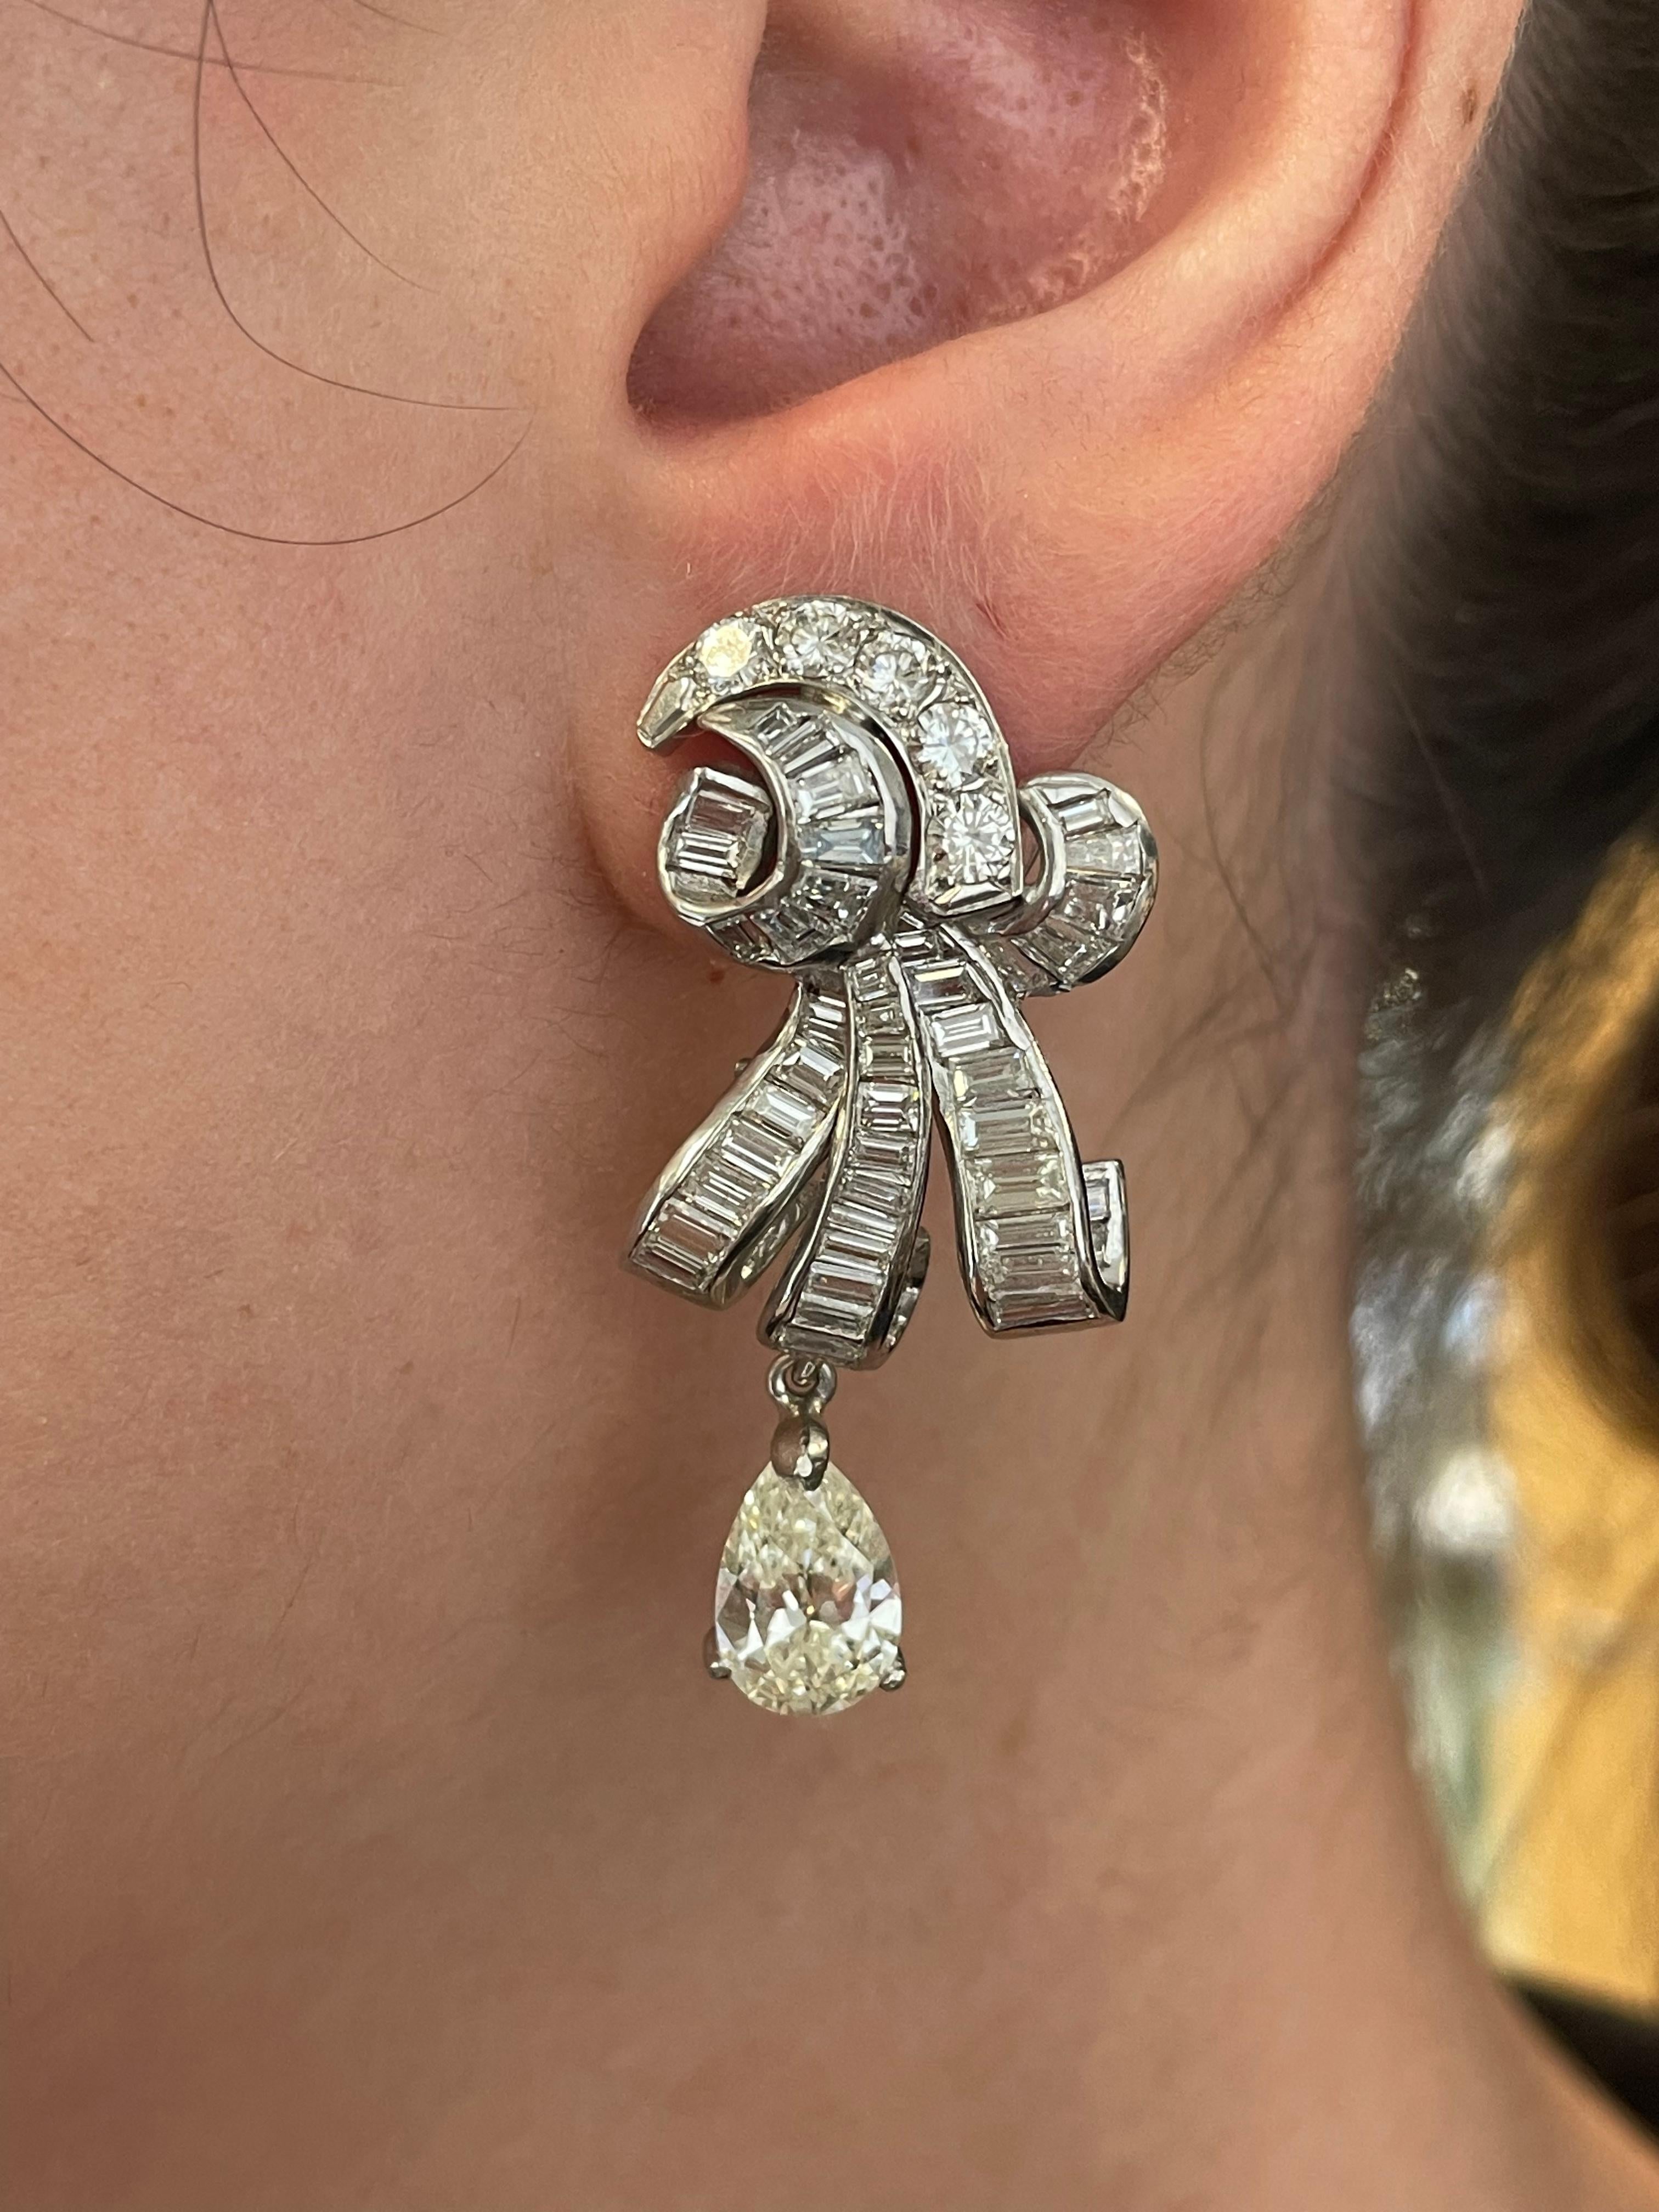 Stunning vintage pear diamond earrings. High jewelry sold by Alexander Beverly Hills. 
Approximately 7.85 carats total diamond weight. 
2 pear brilliant diamonds, apx 1.80 carats. Apprximately J/K color and VS clarity. Complimented by approximately